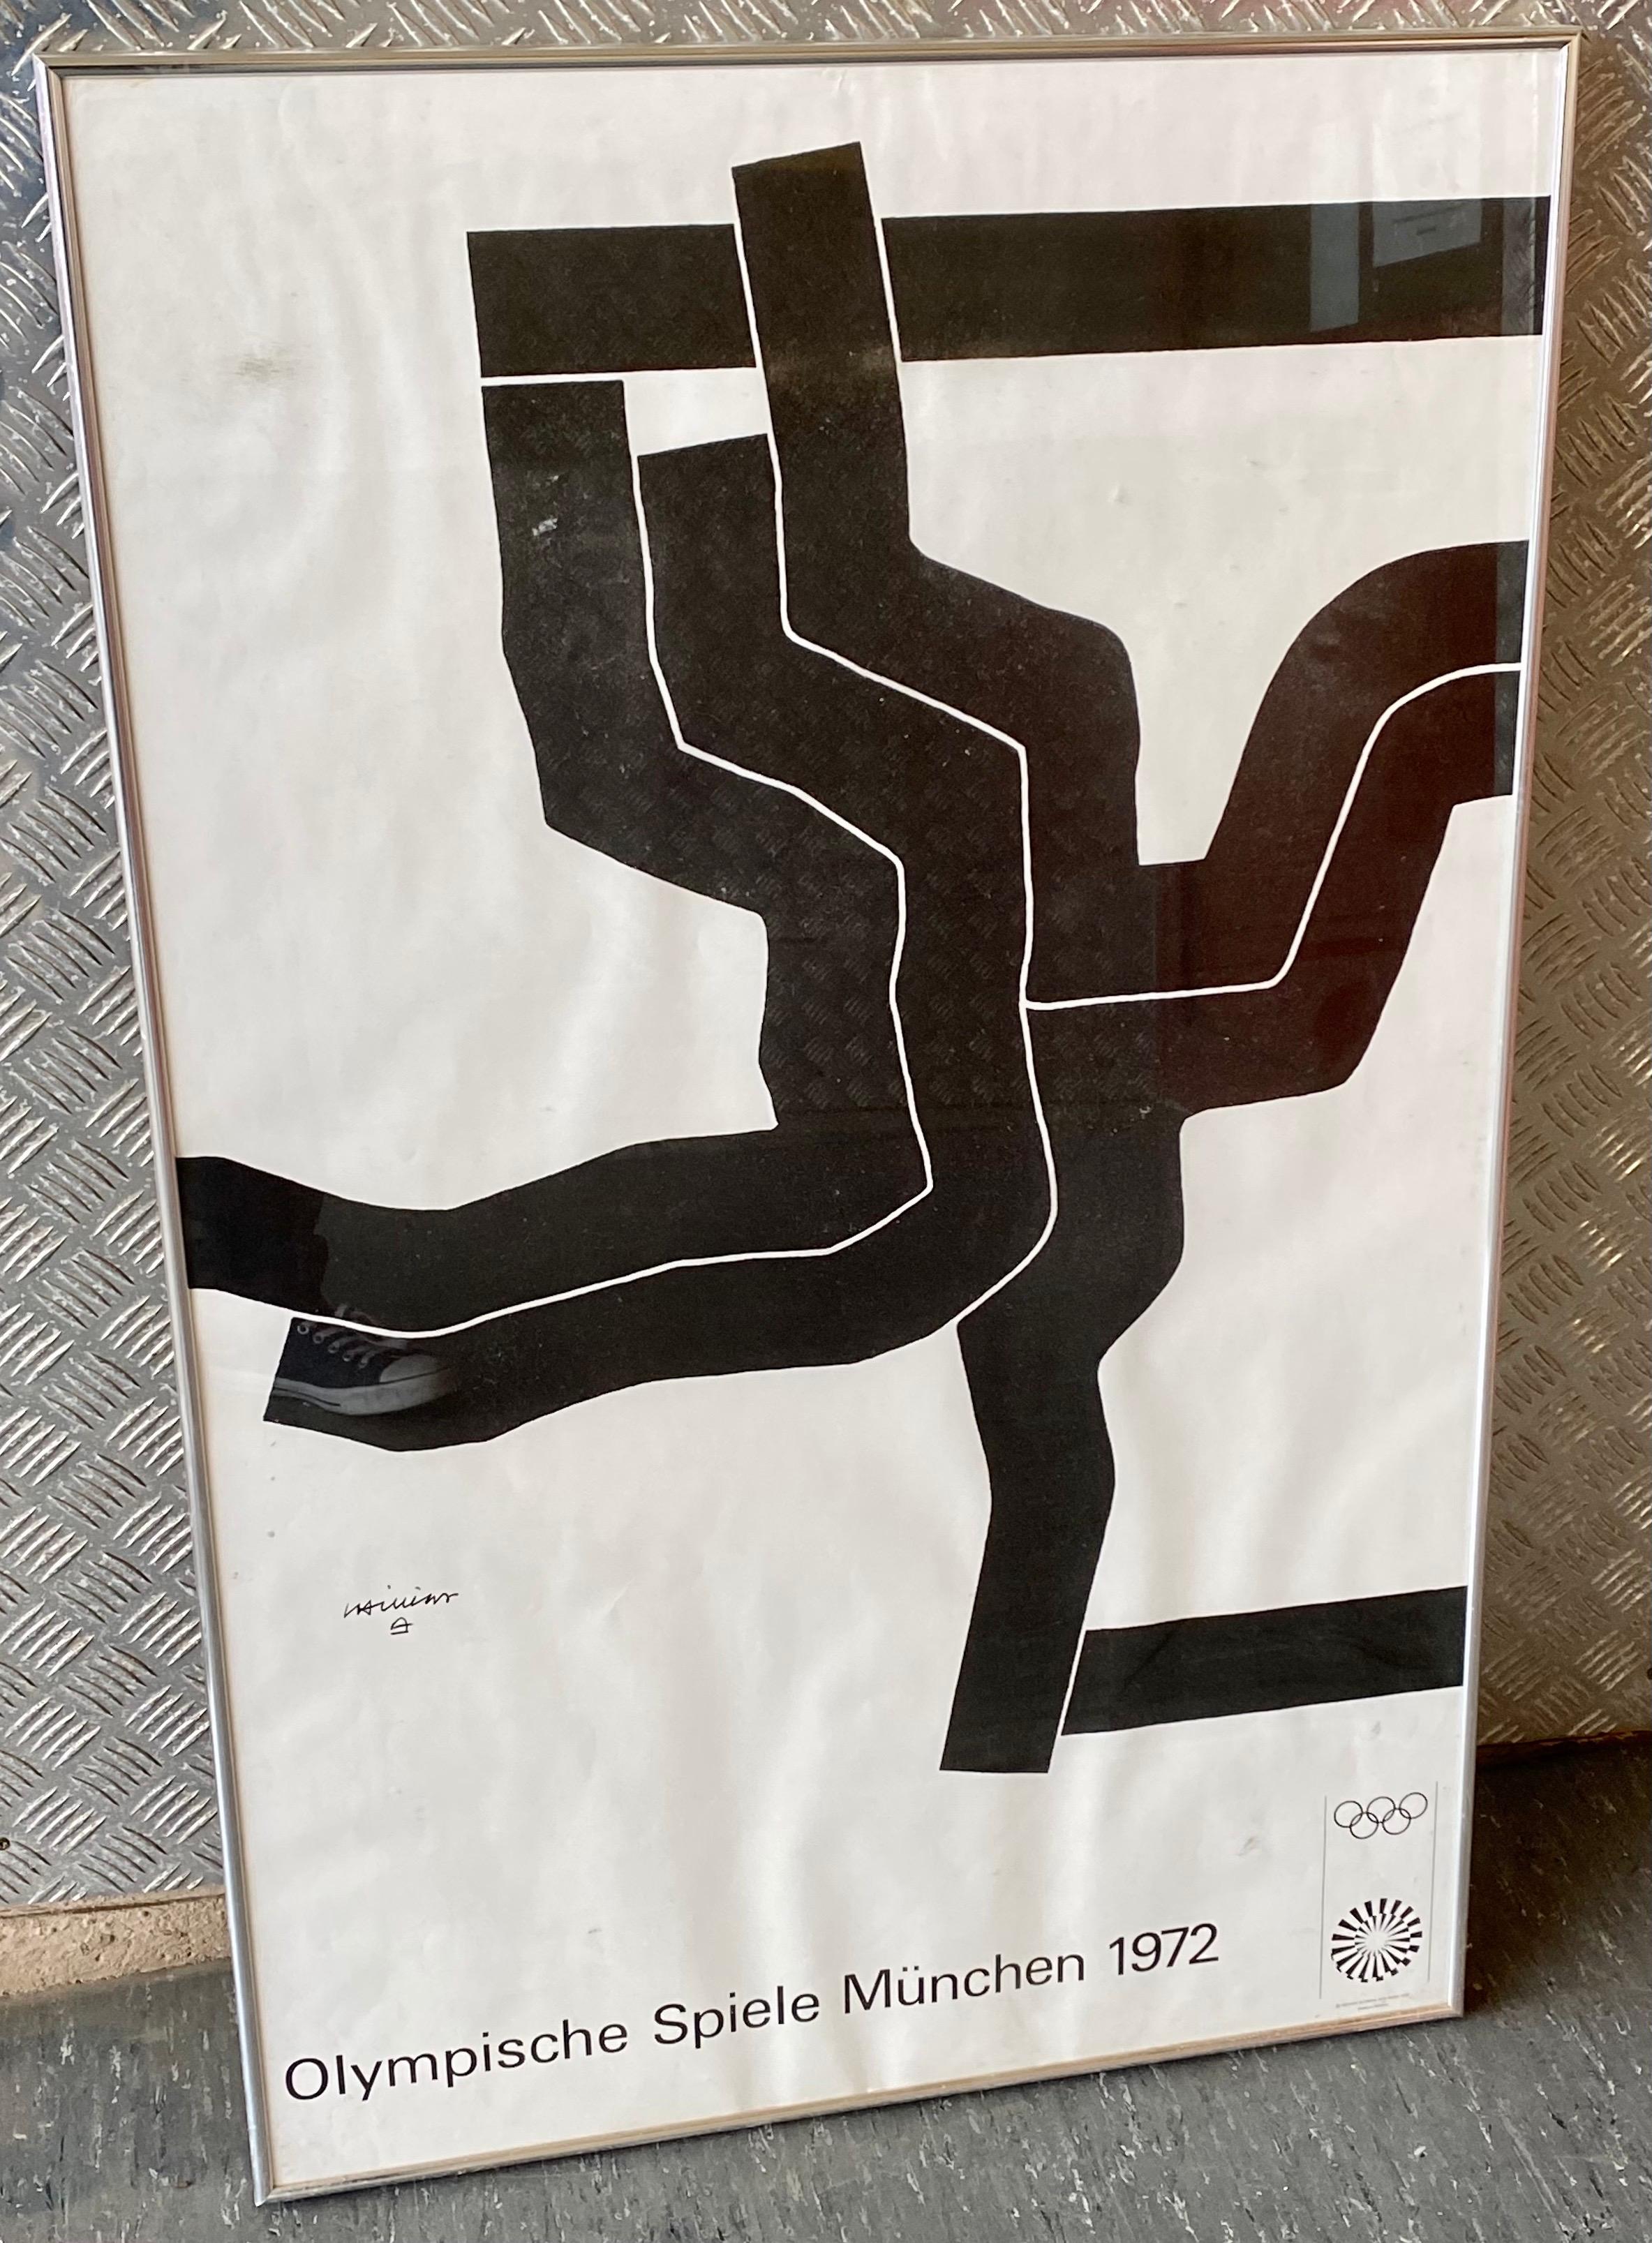 This is an original lithographic poster made for the Munich Olympics in 1972. It is a genuine 1970s issue and not a later reproduction of modern copy. It is sold as a genuine poster - and full refunds would be given if you were not satisfied with